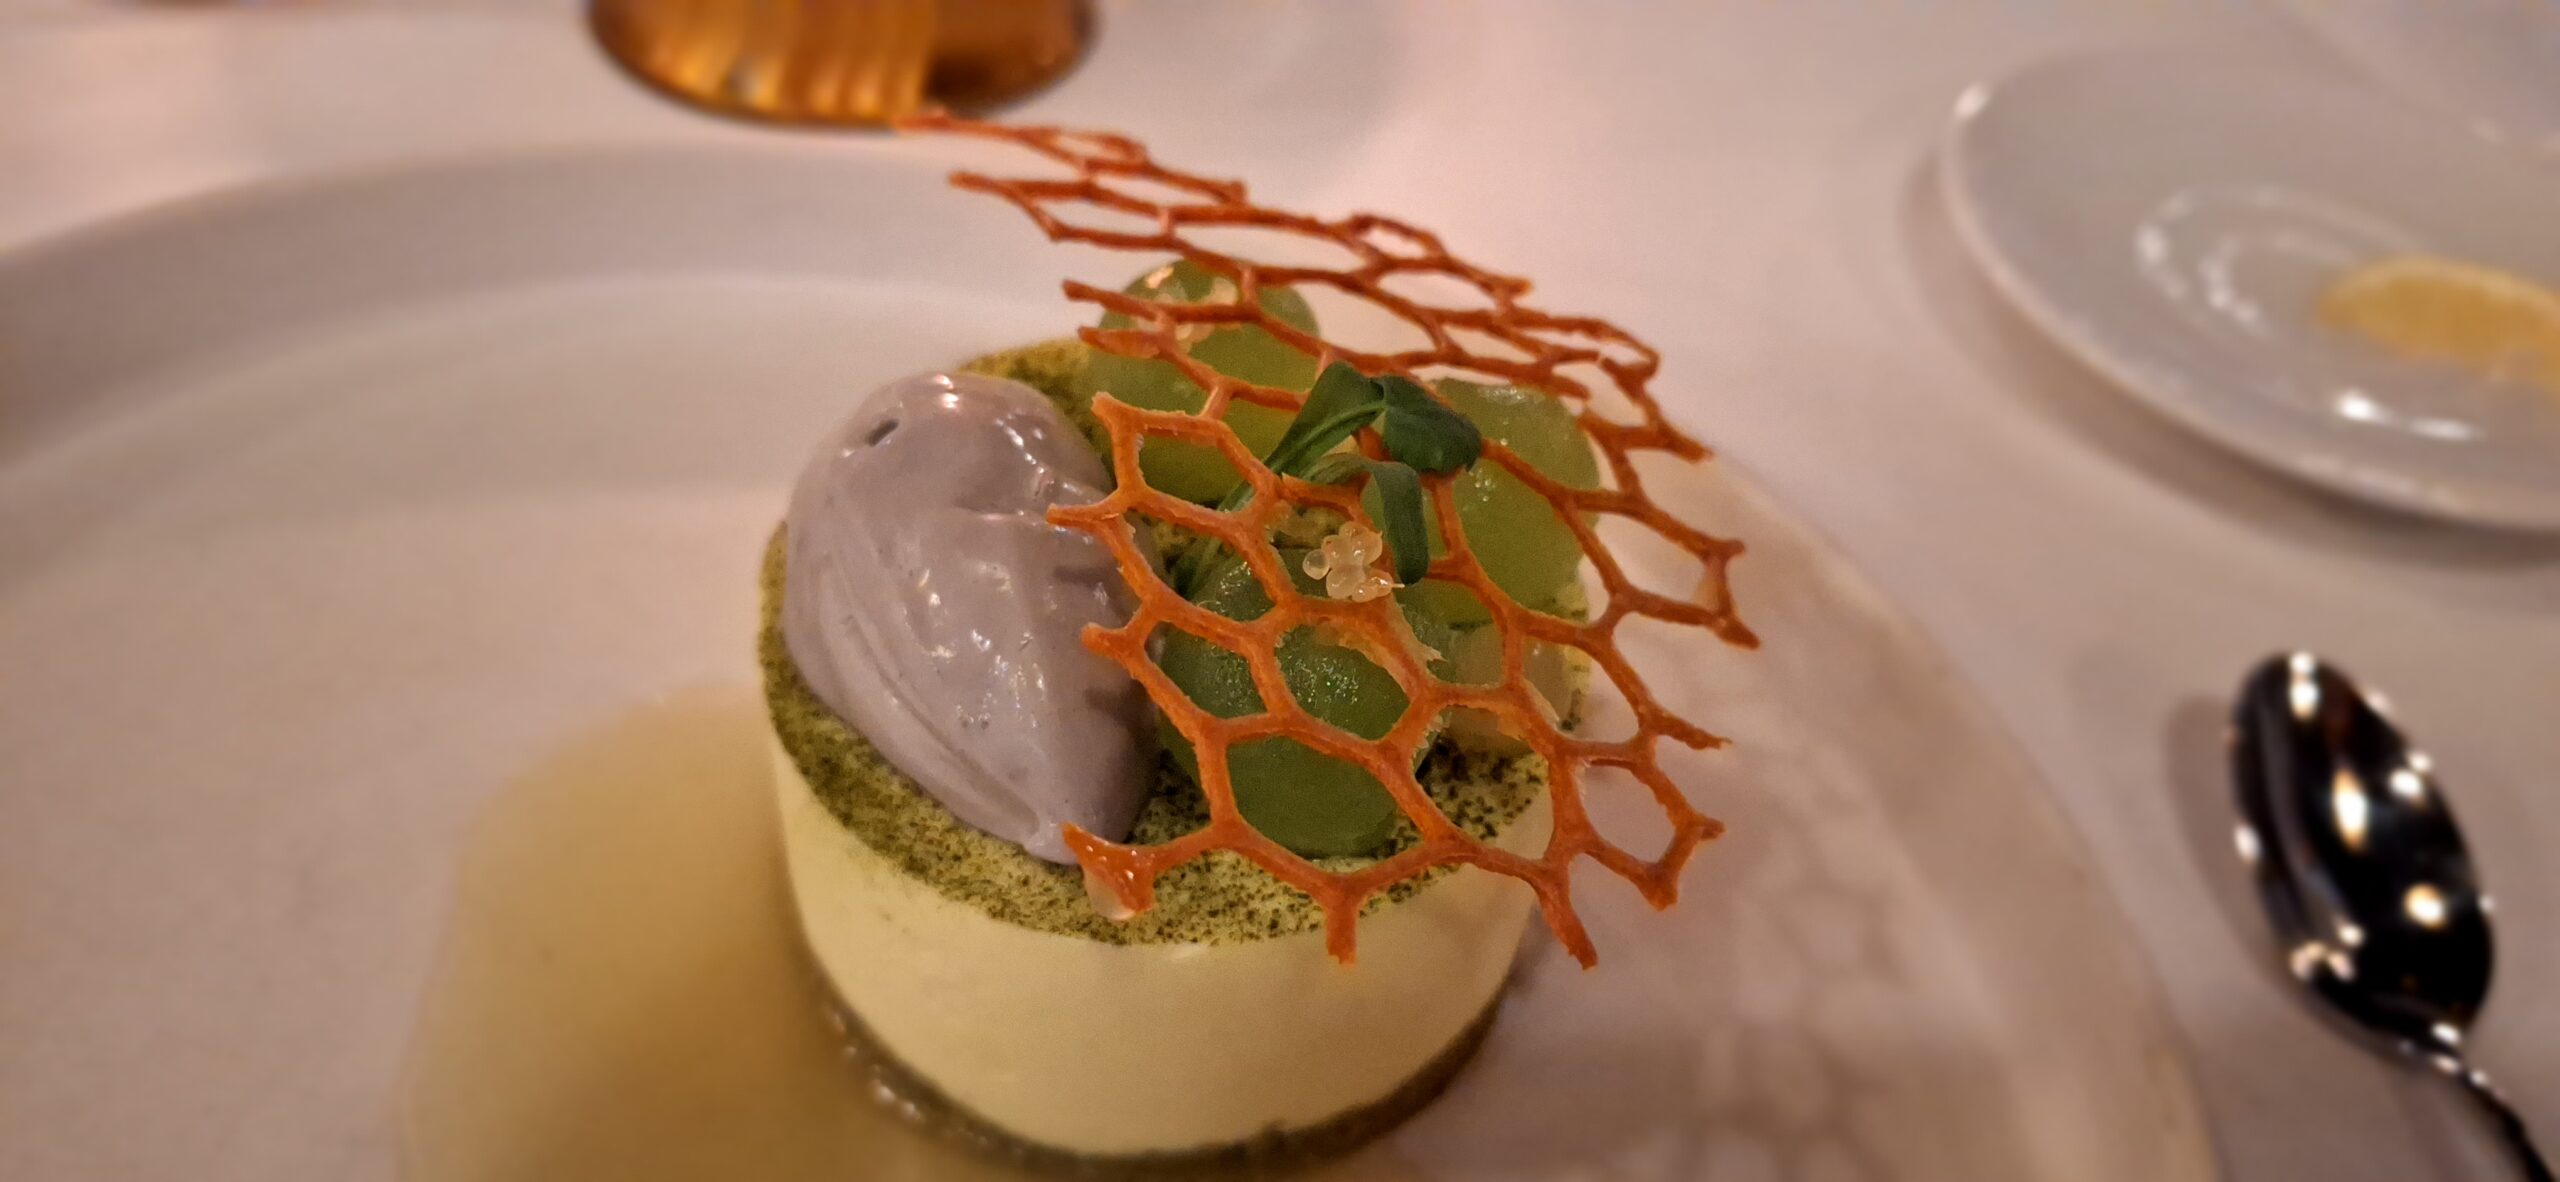 a dessert with a net on top